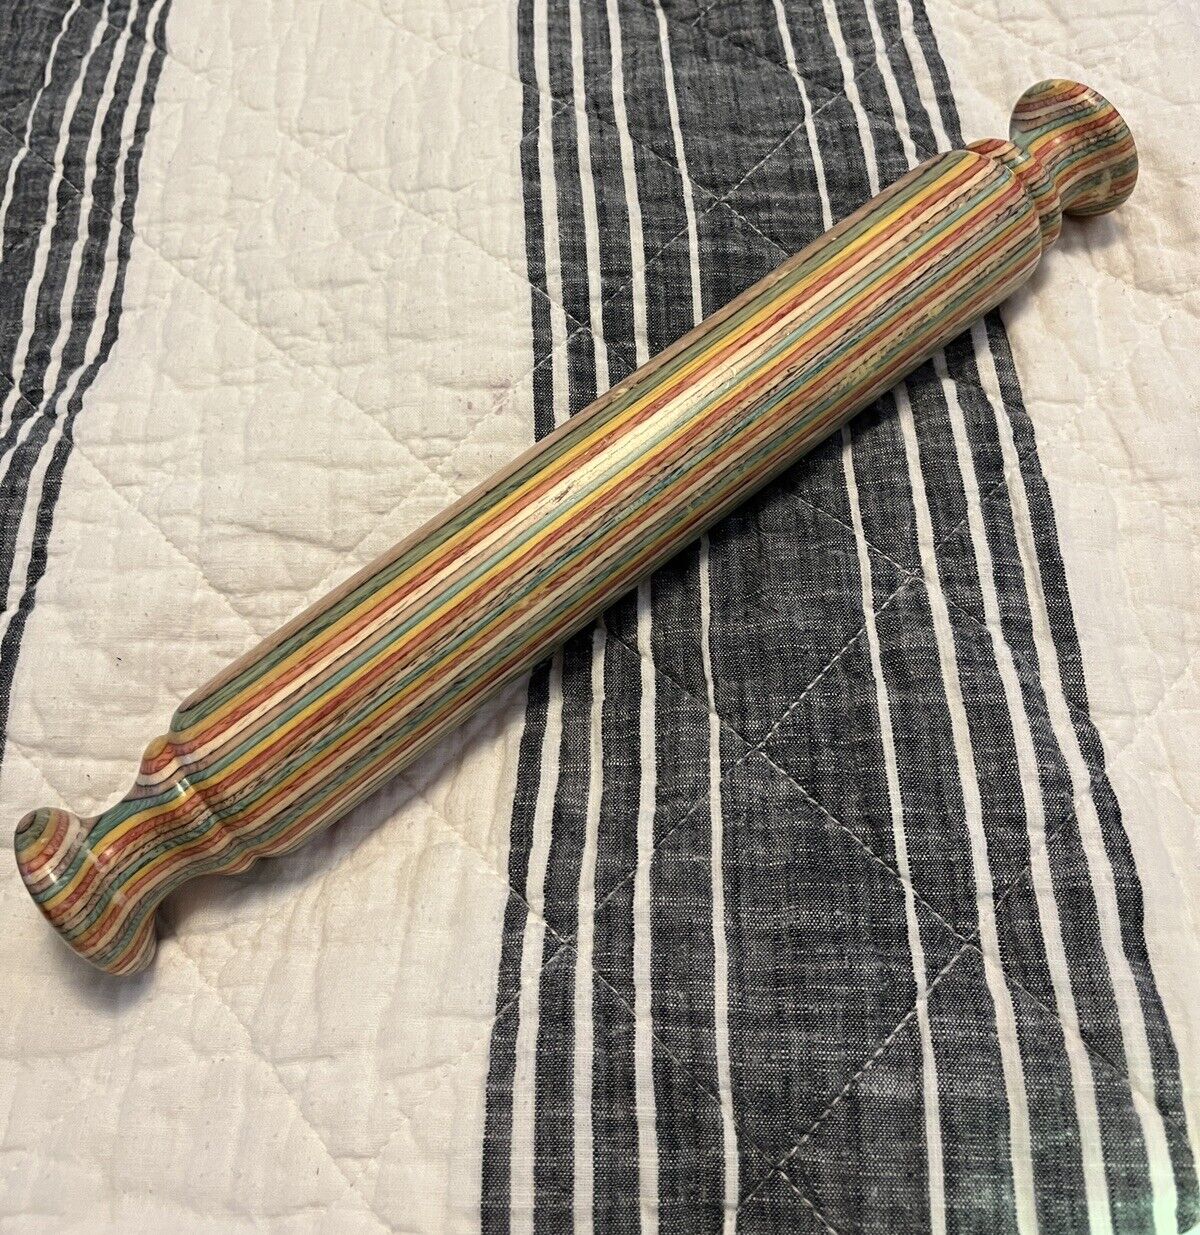 Vintage Carved Wood Colorful Stripes Rolling Pin 